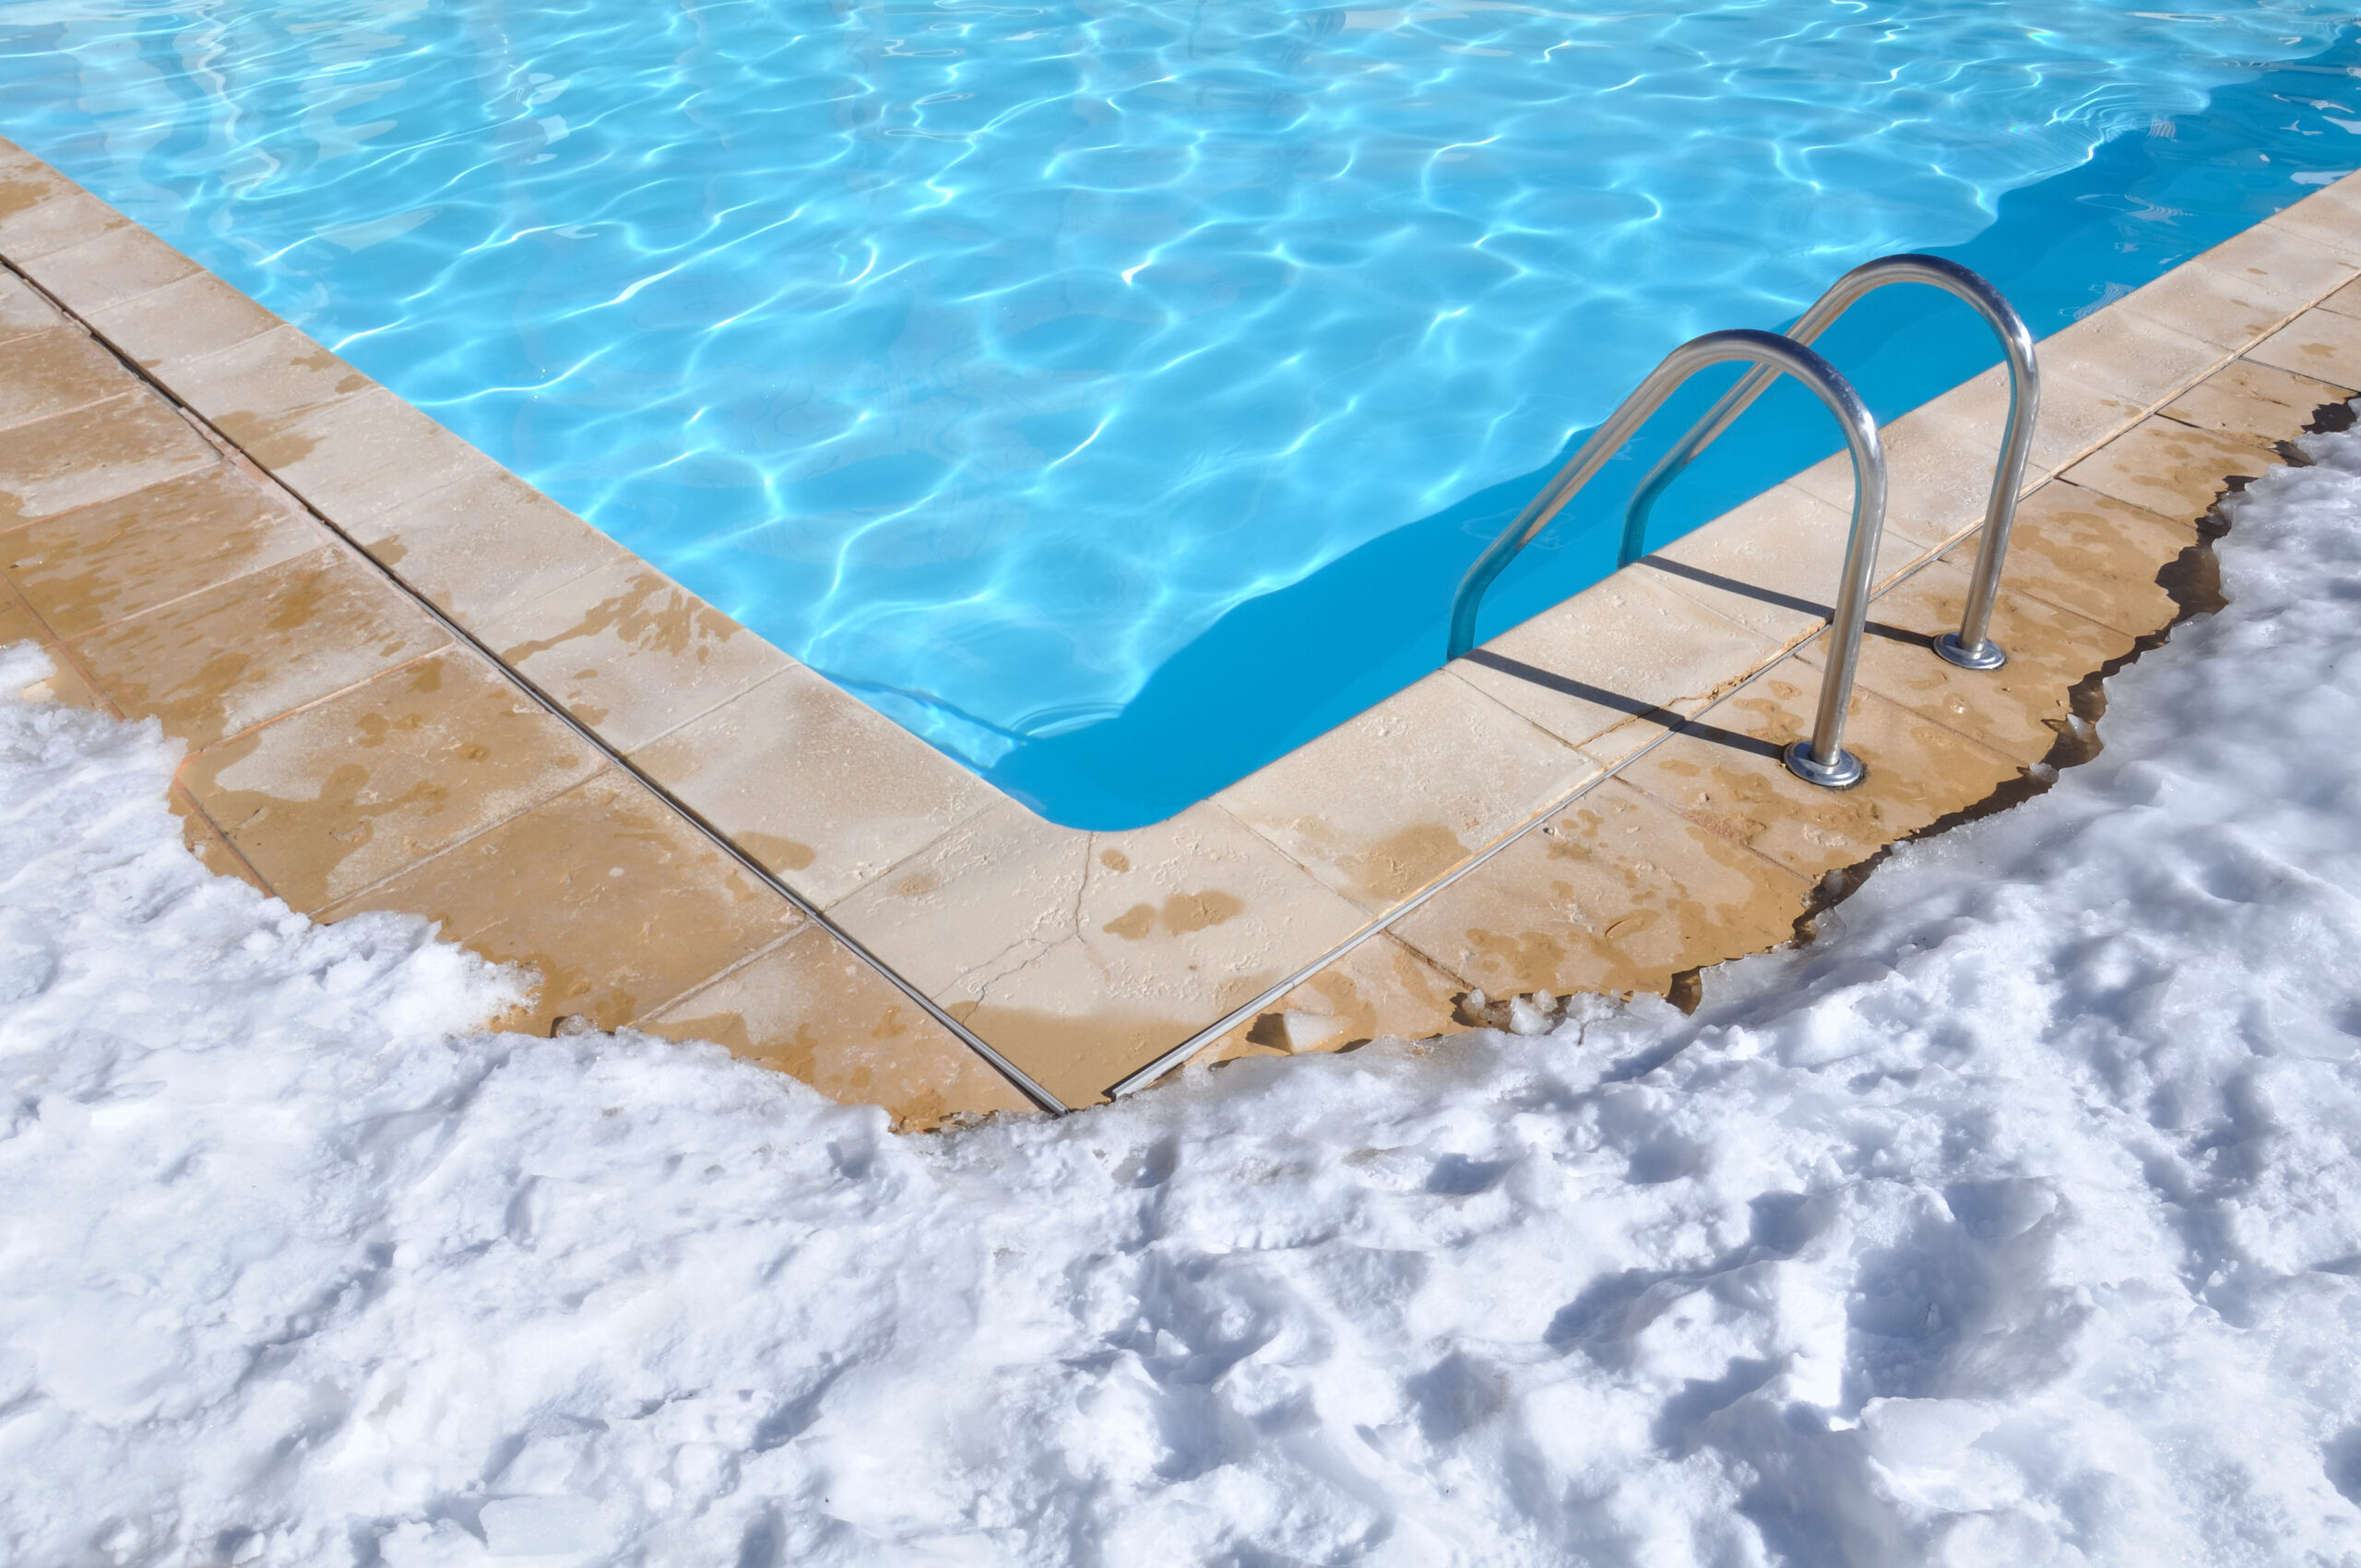 A swimming pool with a layer of snow at its edge